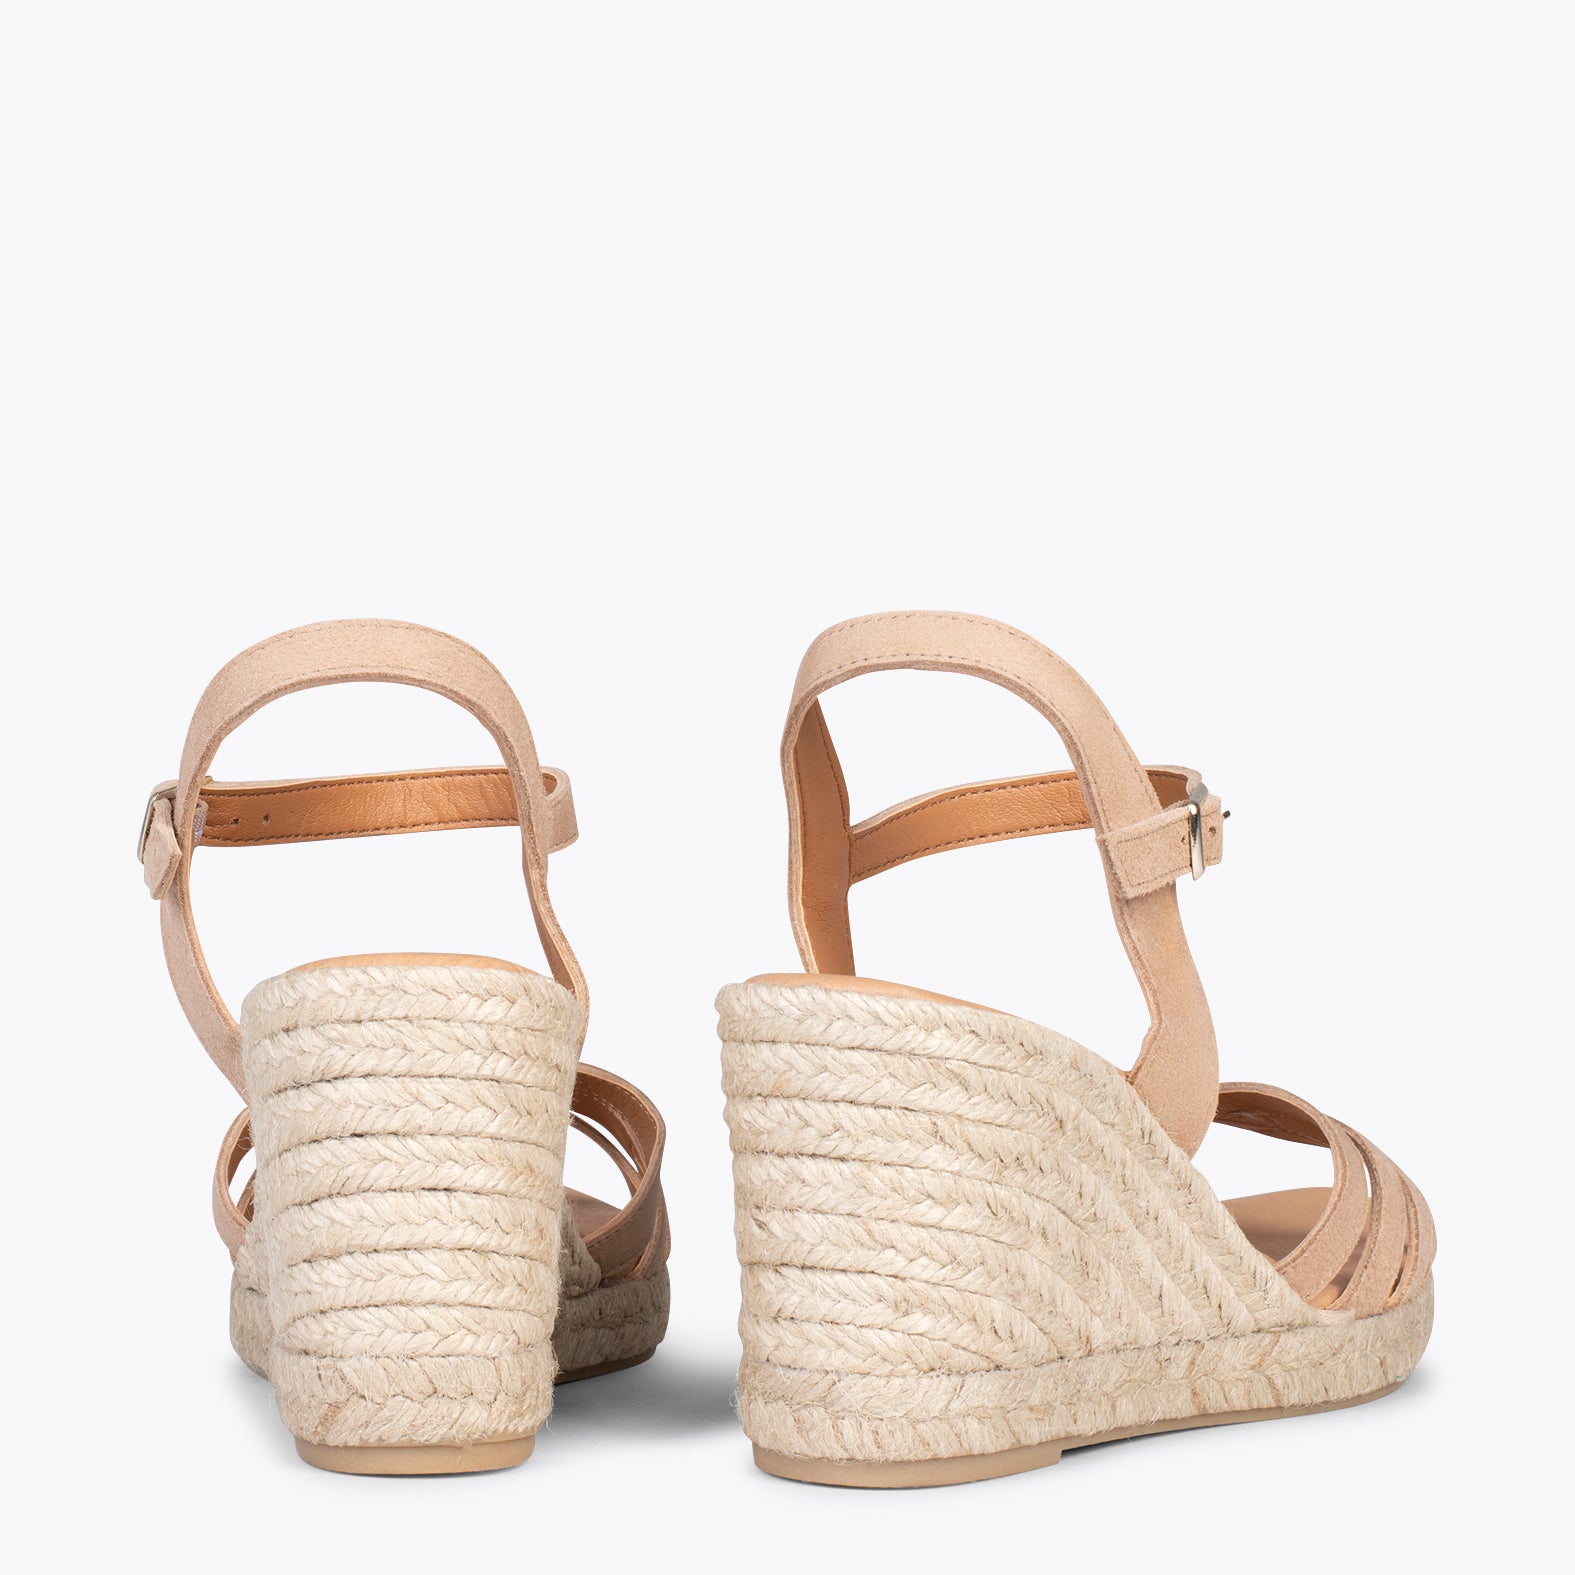 HOYAMBRE – BEIGE espadrilles with braided front